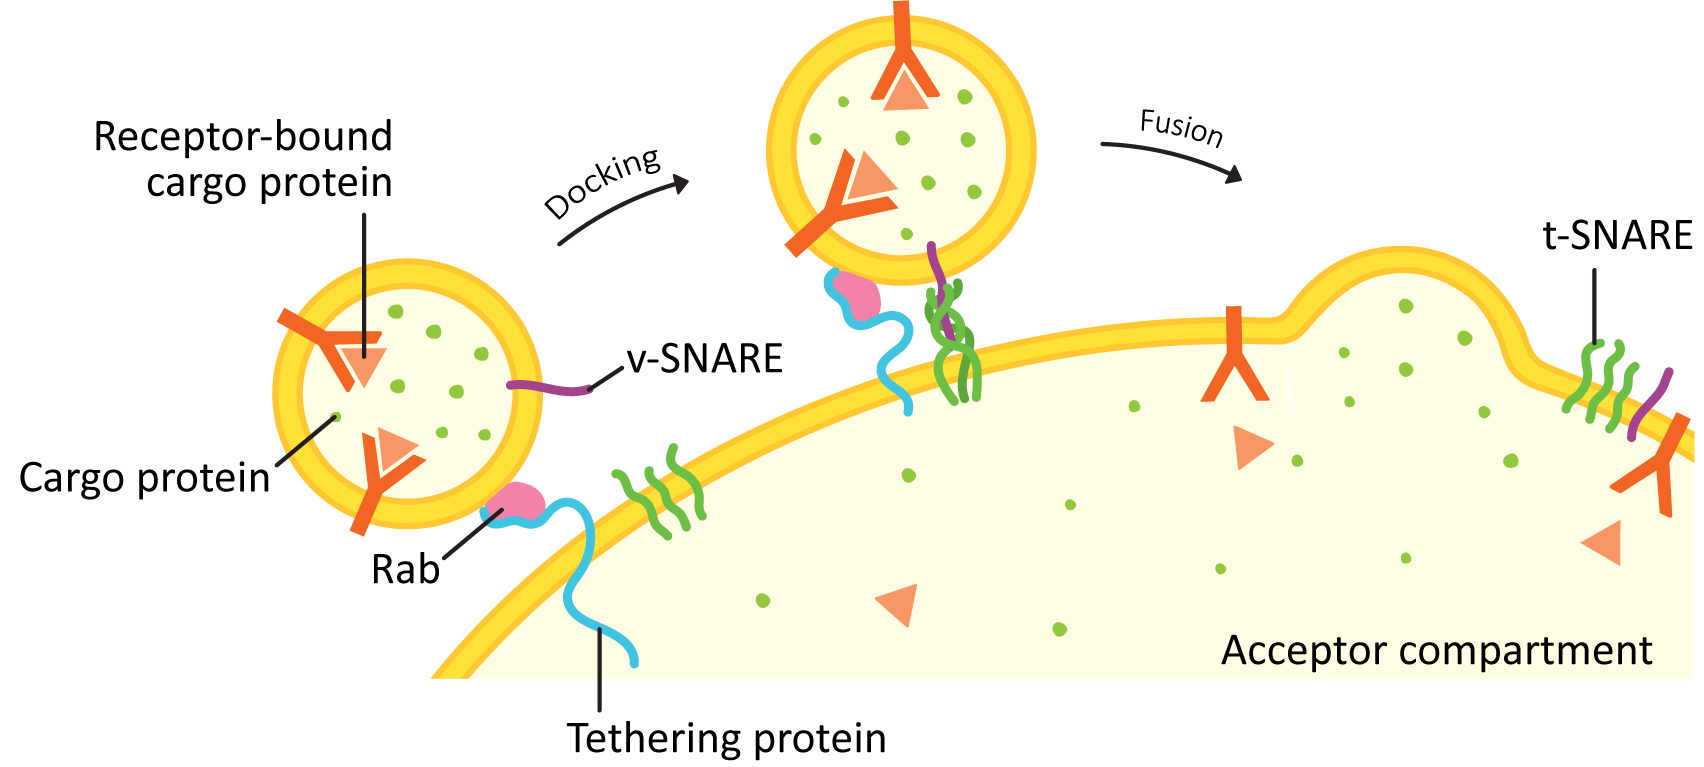 Schematic of docking and fusion of vesicles using SNAREs.